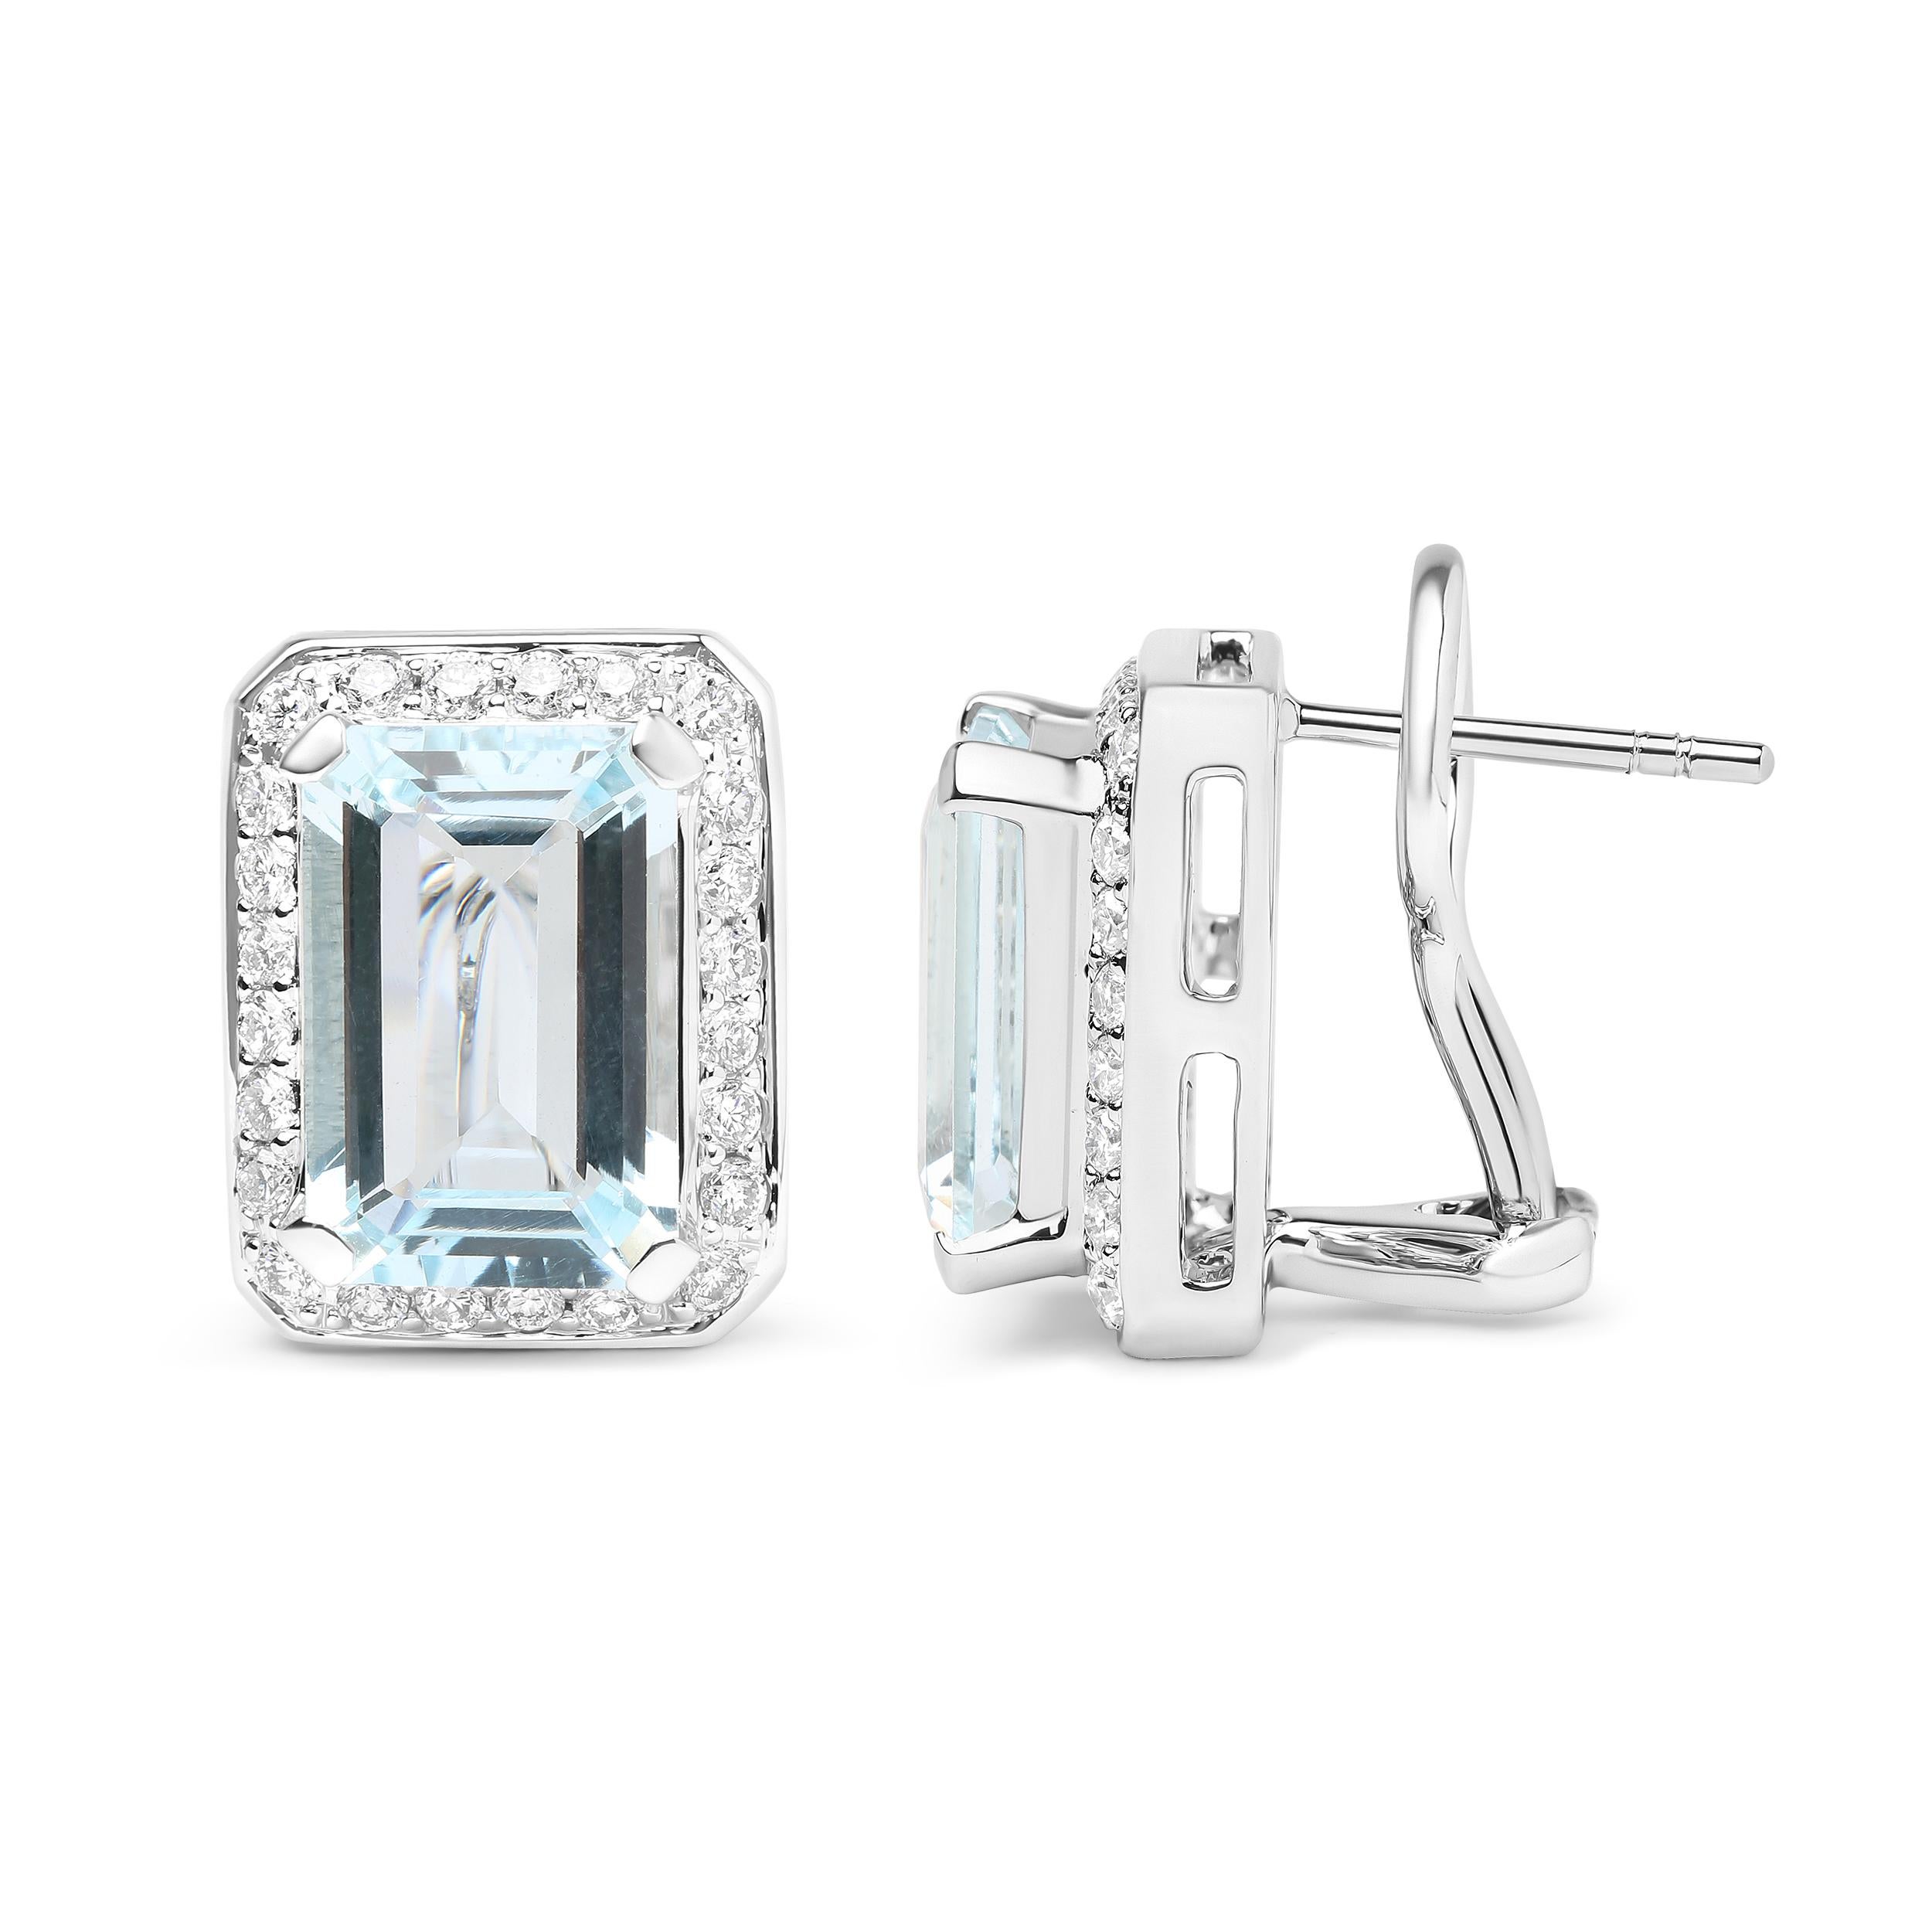 Contemporary 18K White Gold 3/4 Cttw Diamond and Blue Aquamarine Gemstone Halo Stud Earrings  For Sale